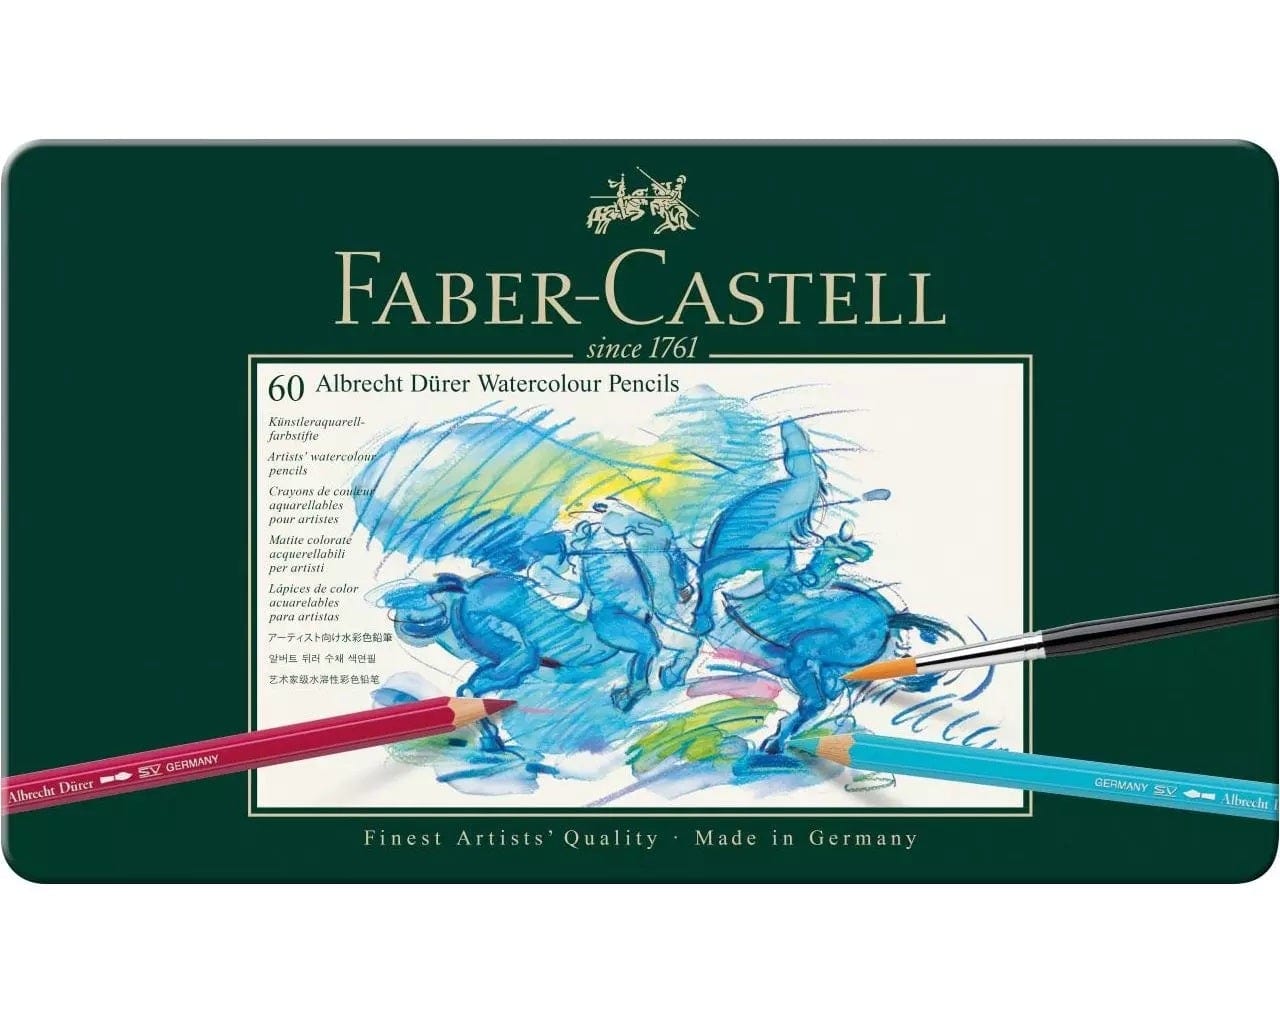 Load image into Gallery viewer, FABER CASTELL A. DURER TIN Faber-Castell - Albrecht Duerer Tin - Watercolour Pencils - 60 Set - Item #117560
